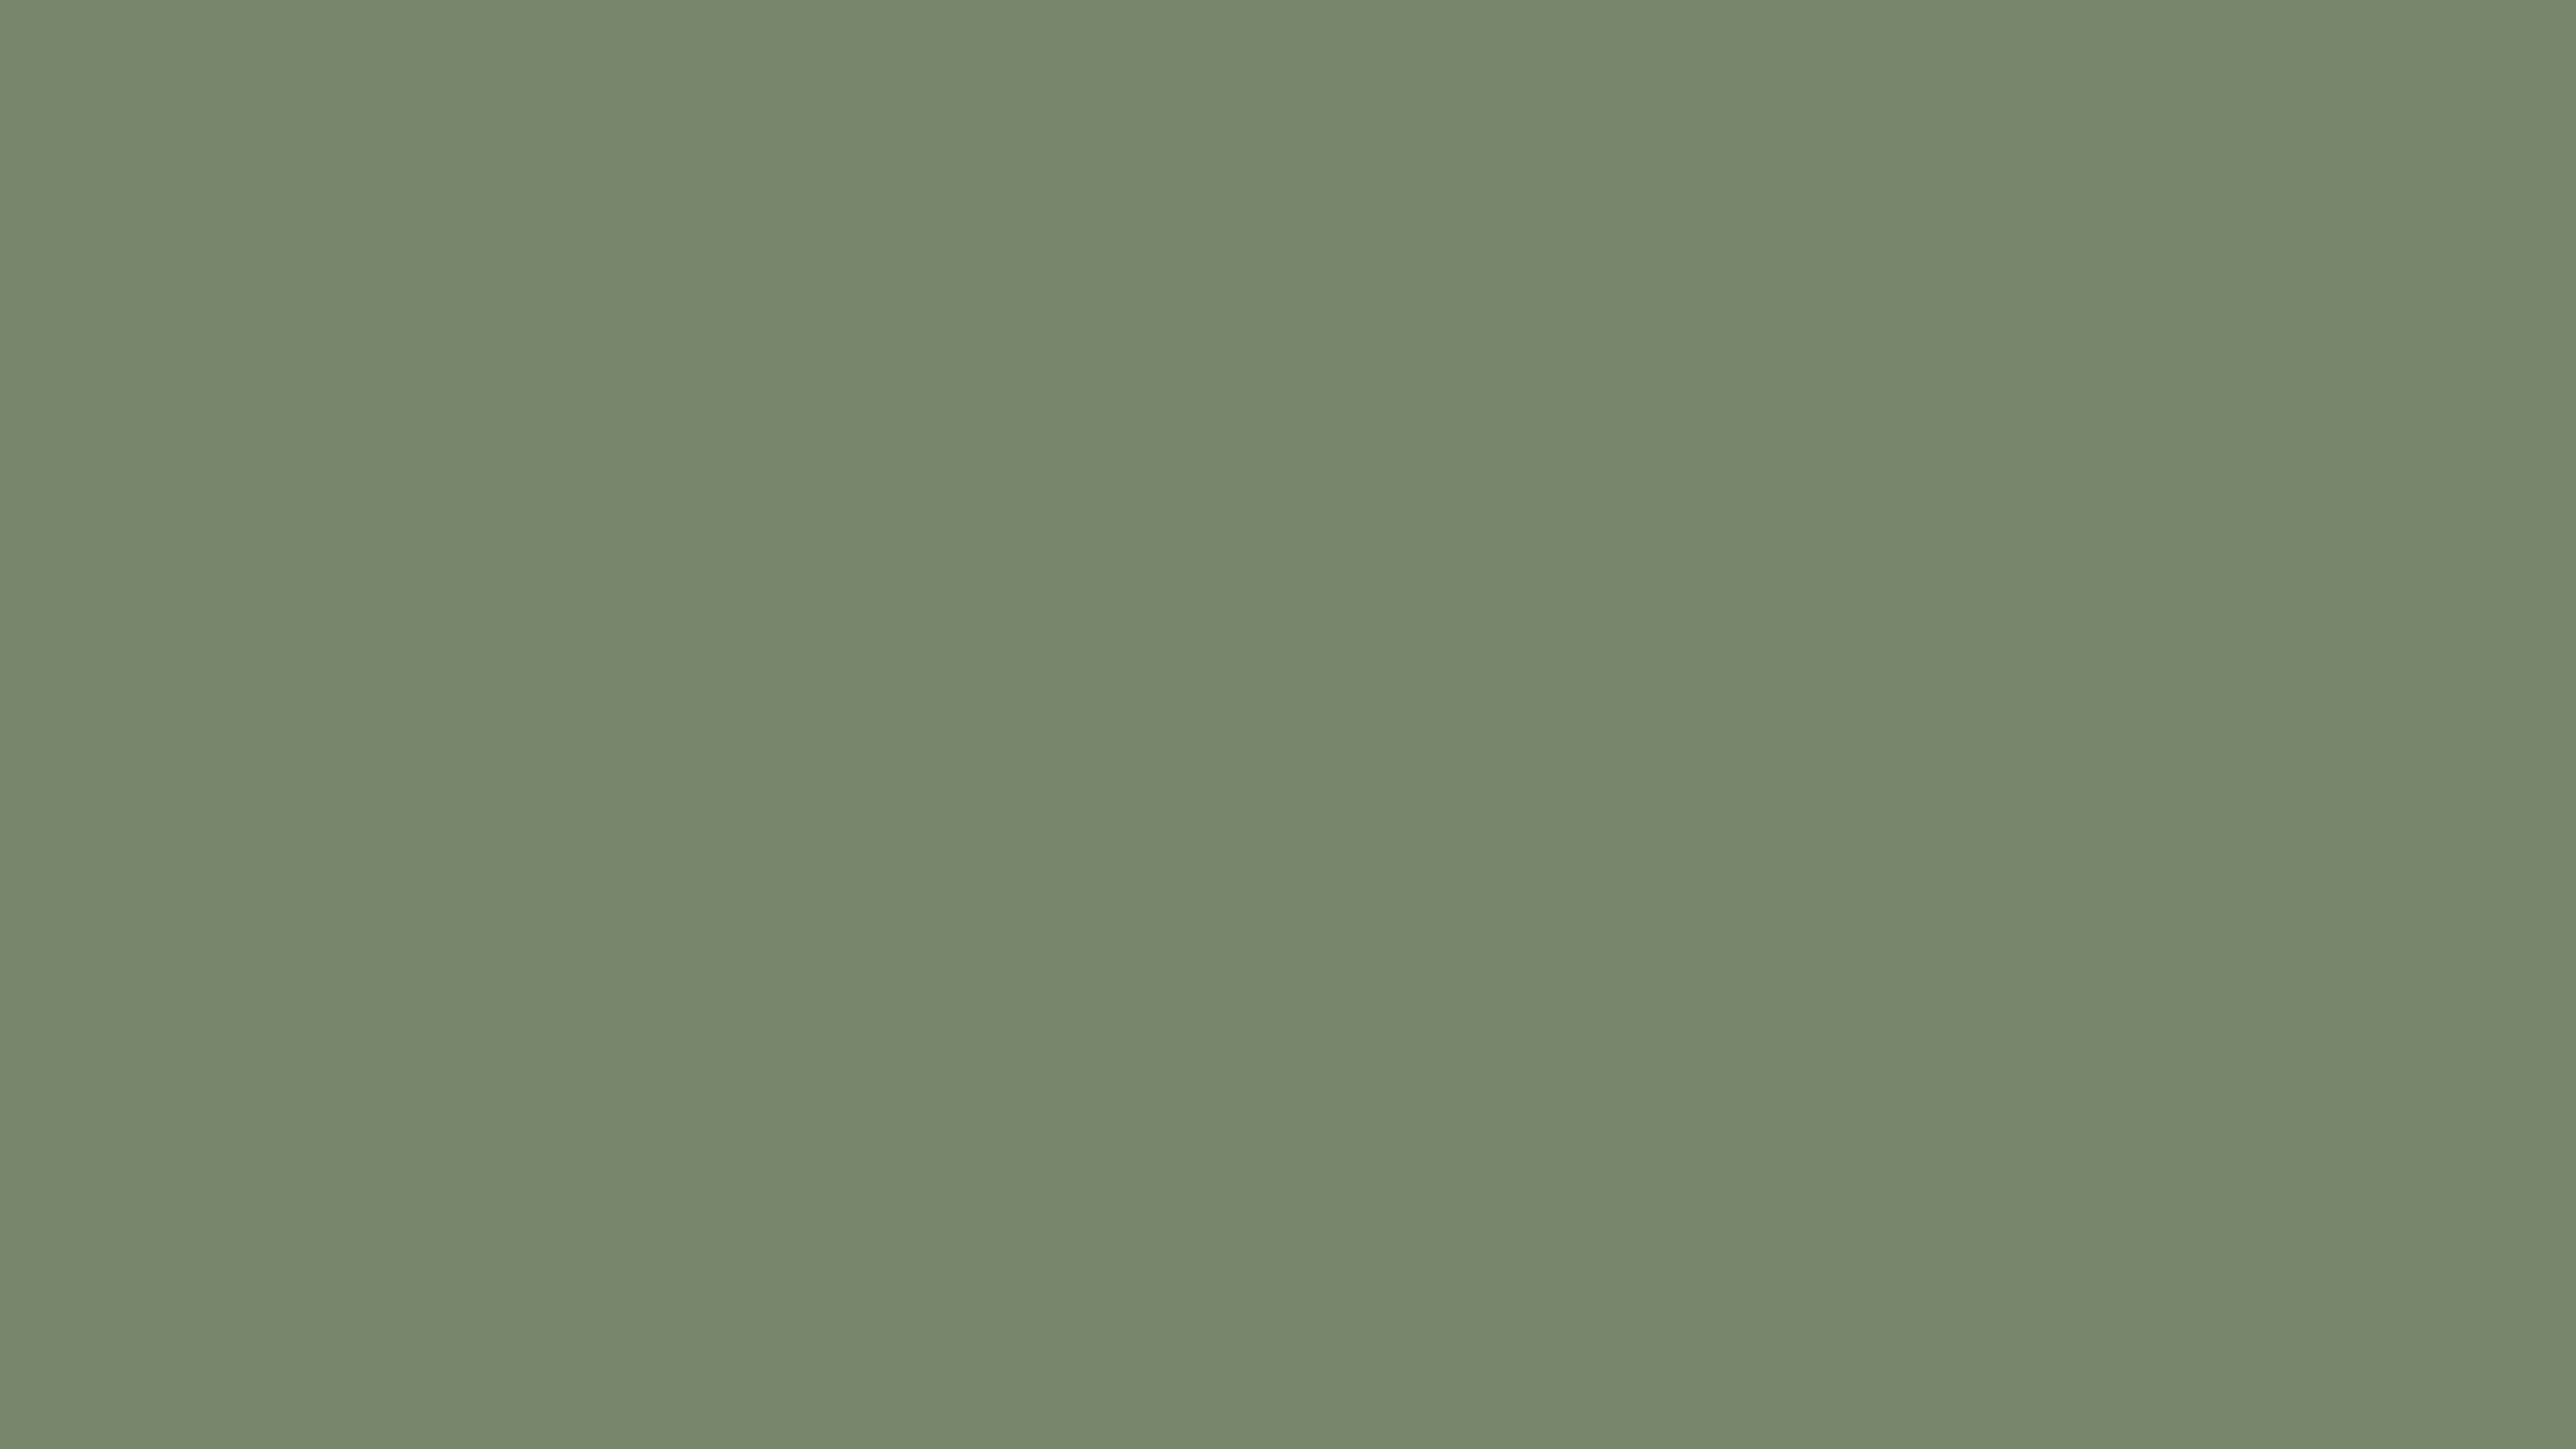 5120x2880 Camouflage Green Solid Color Background